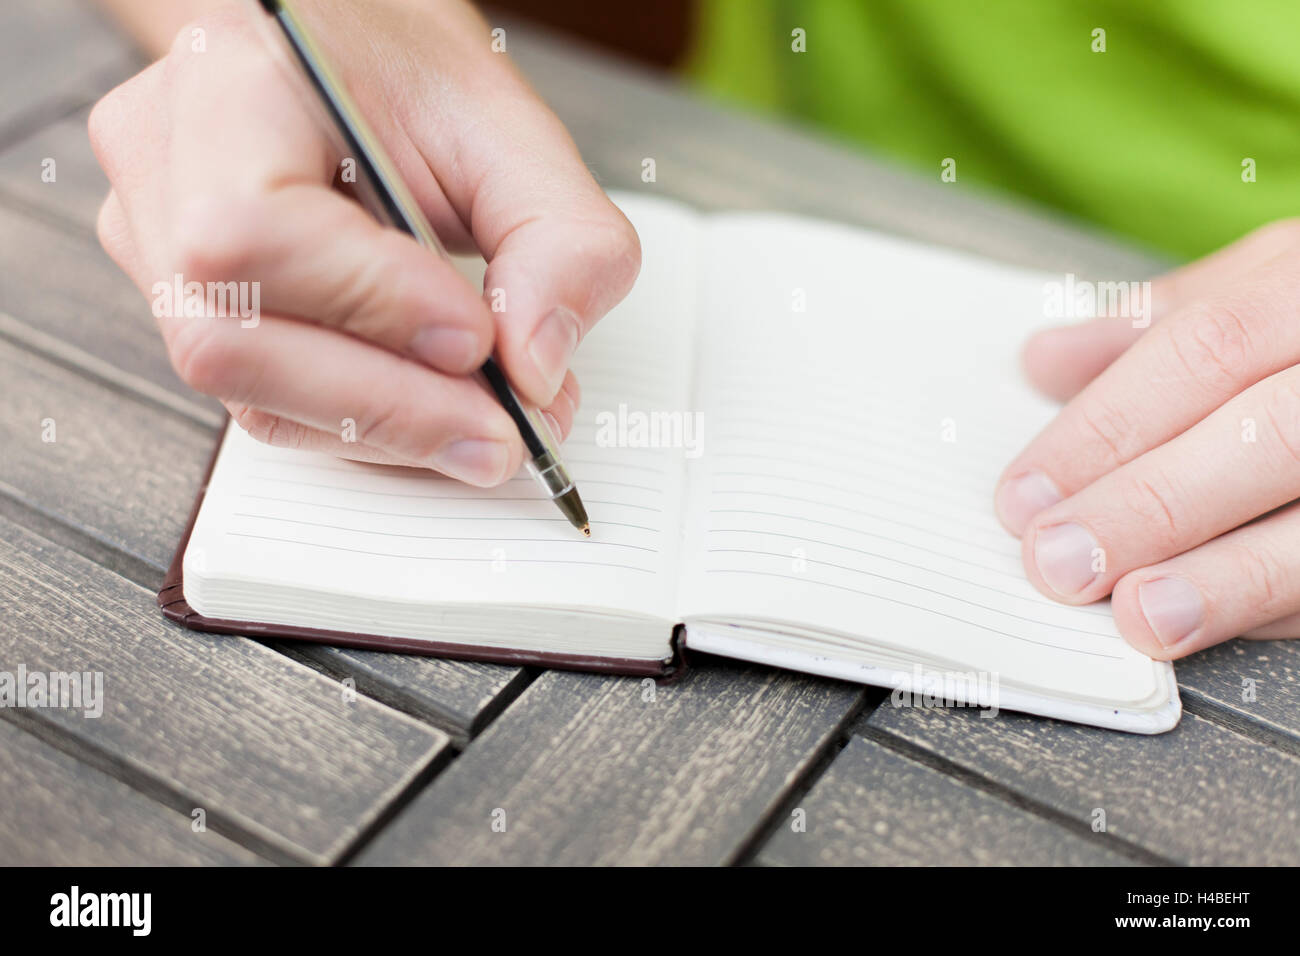 Young man writing notes on a notebook with a pen, close-up view of hands Stock Photo